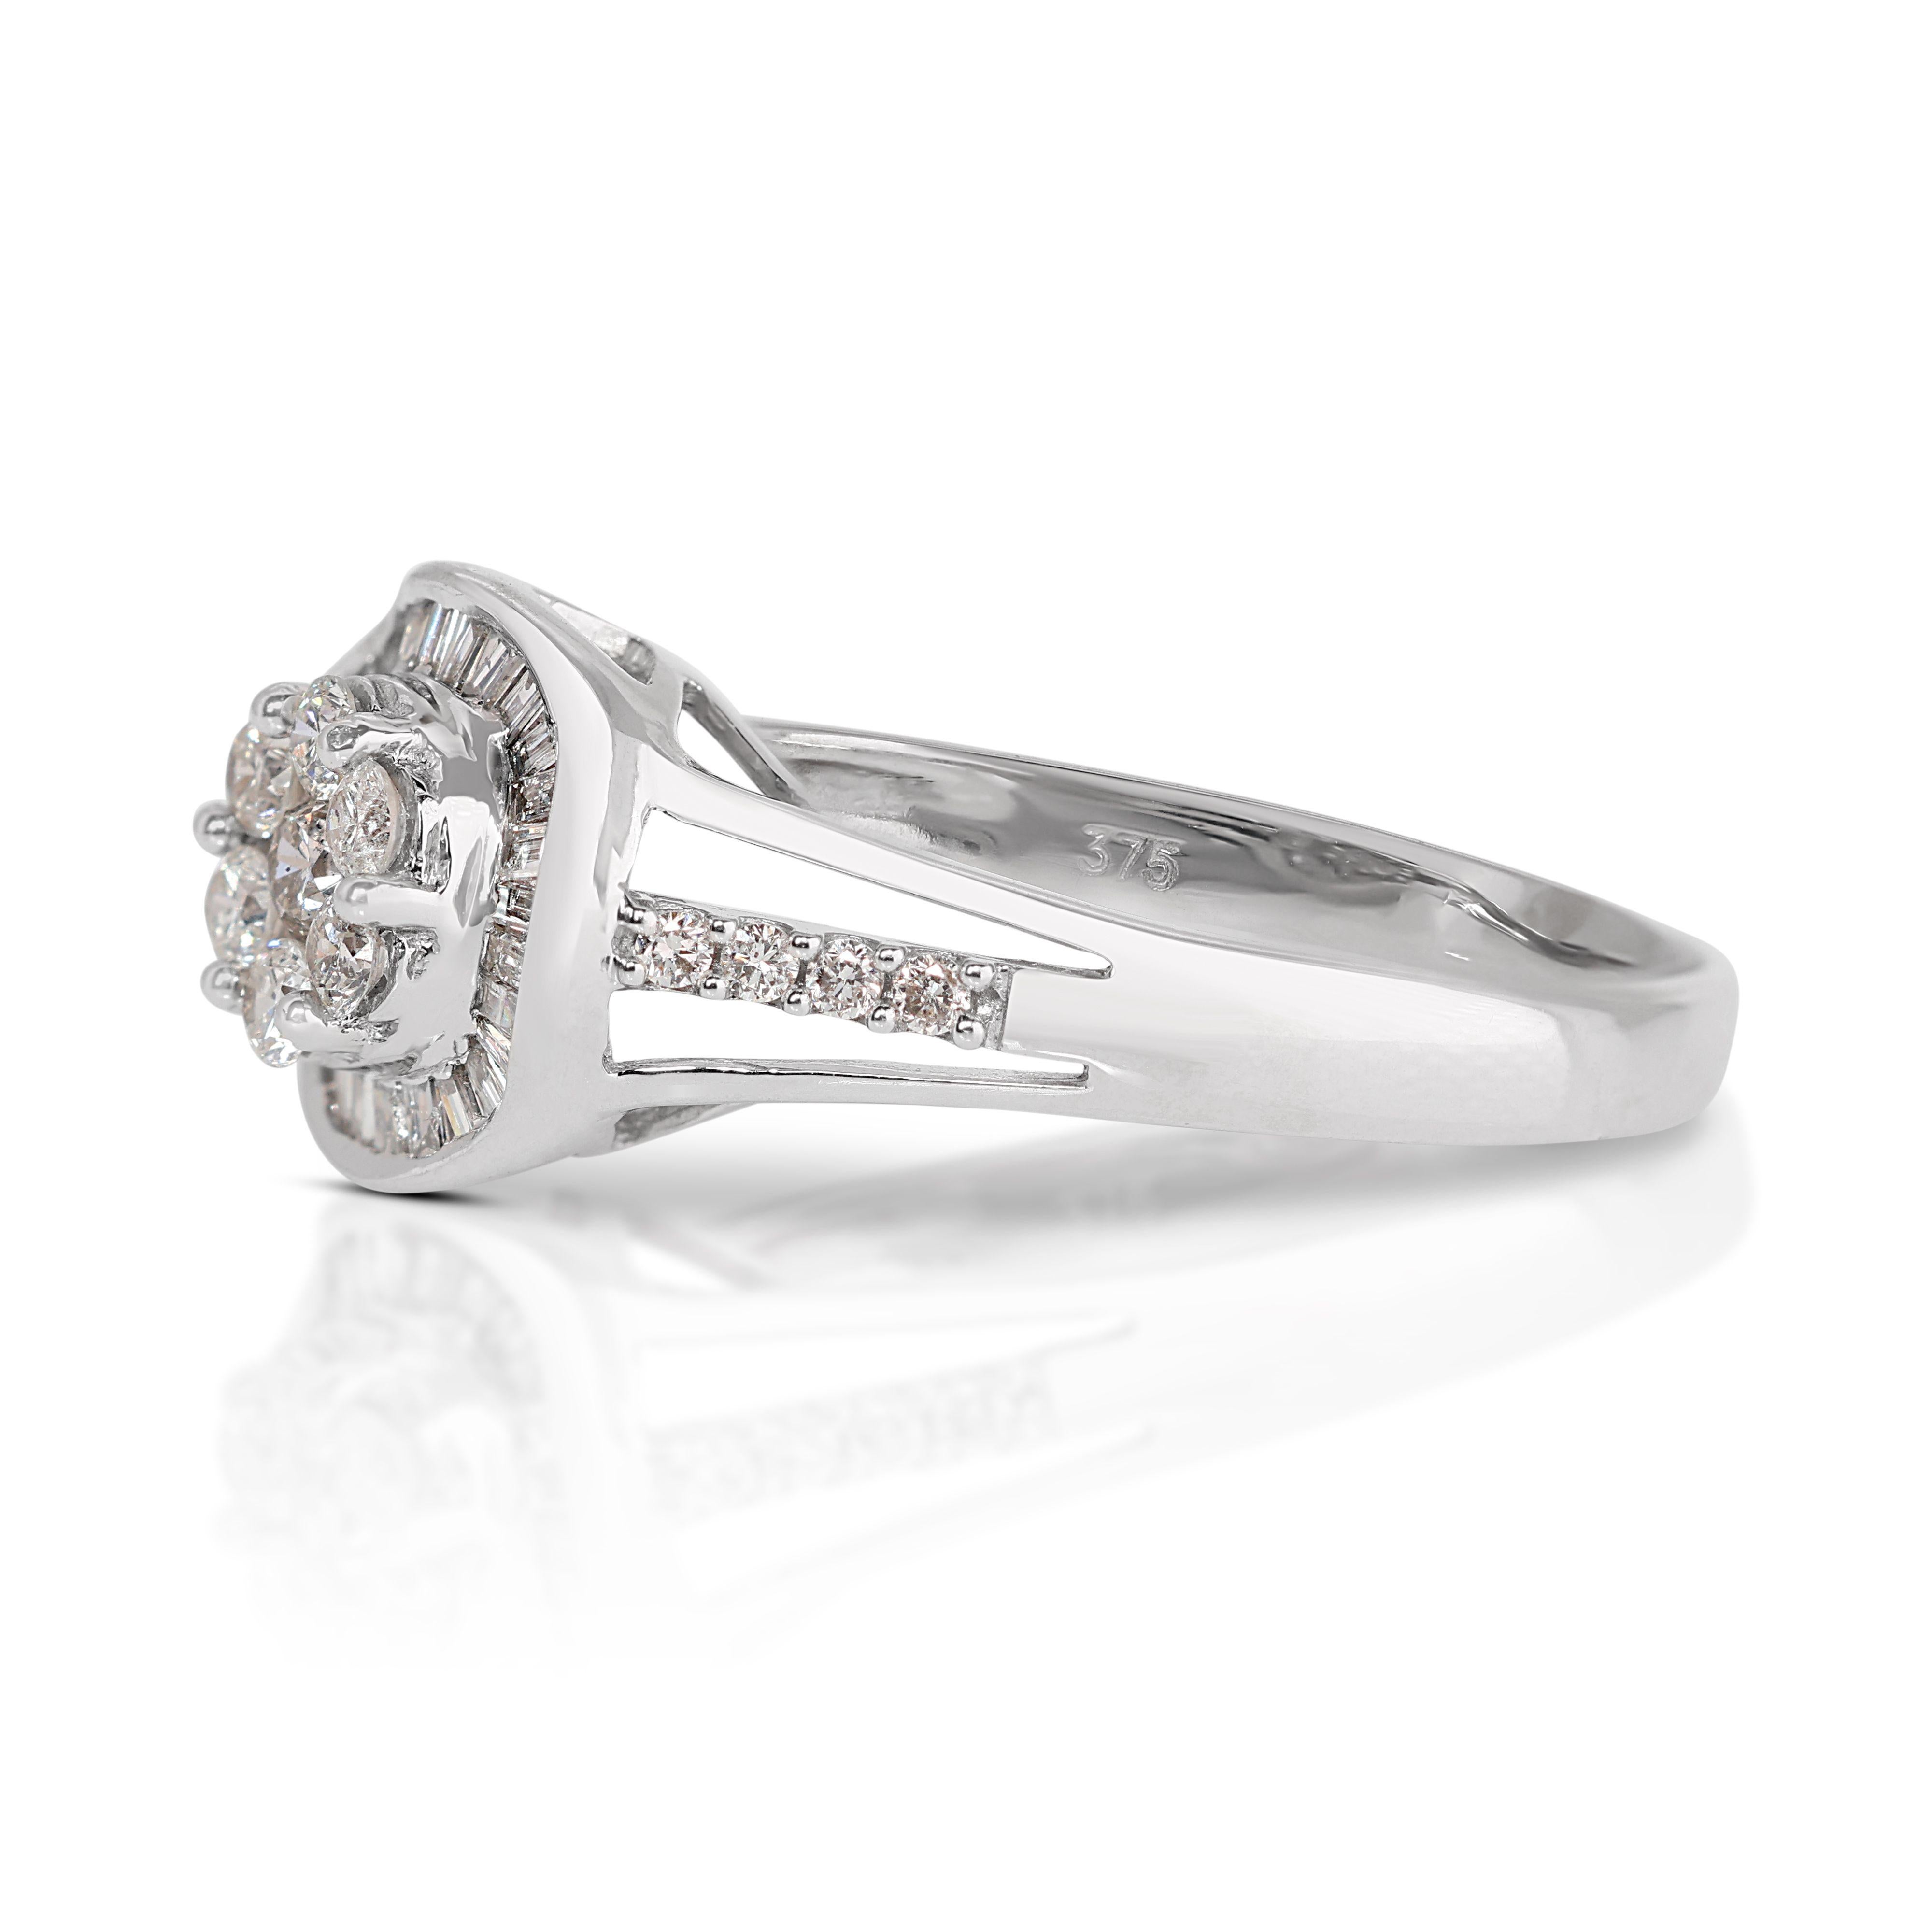 Stunning 10k White Gold Ring with 0.415 Carat Natural Diamonds For Sale 1